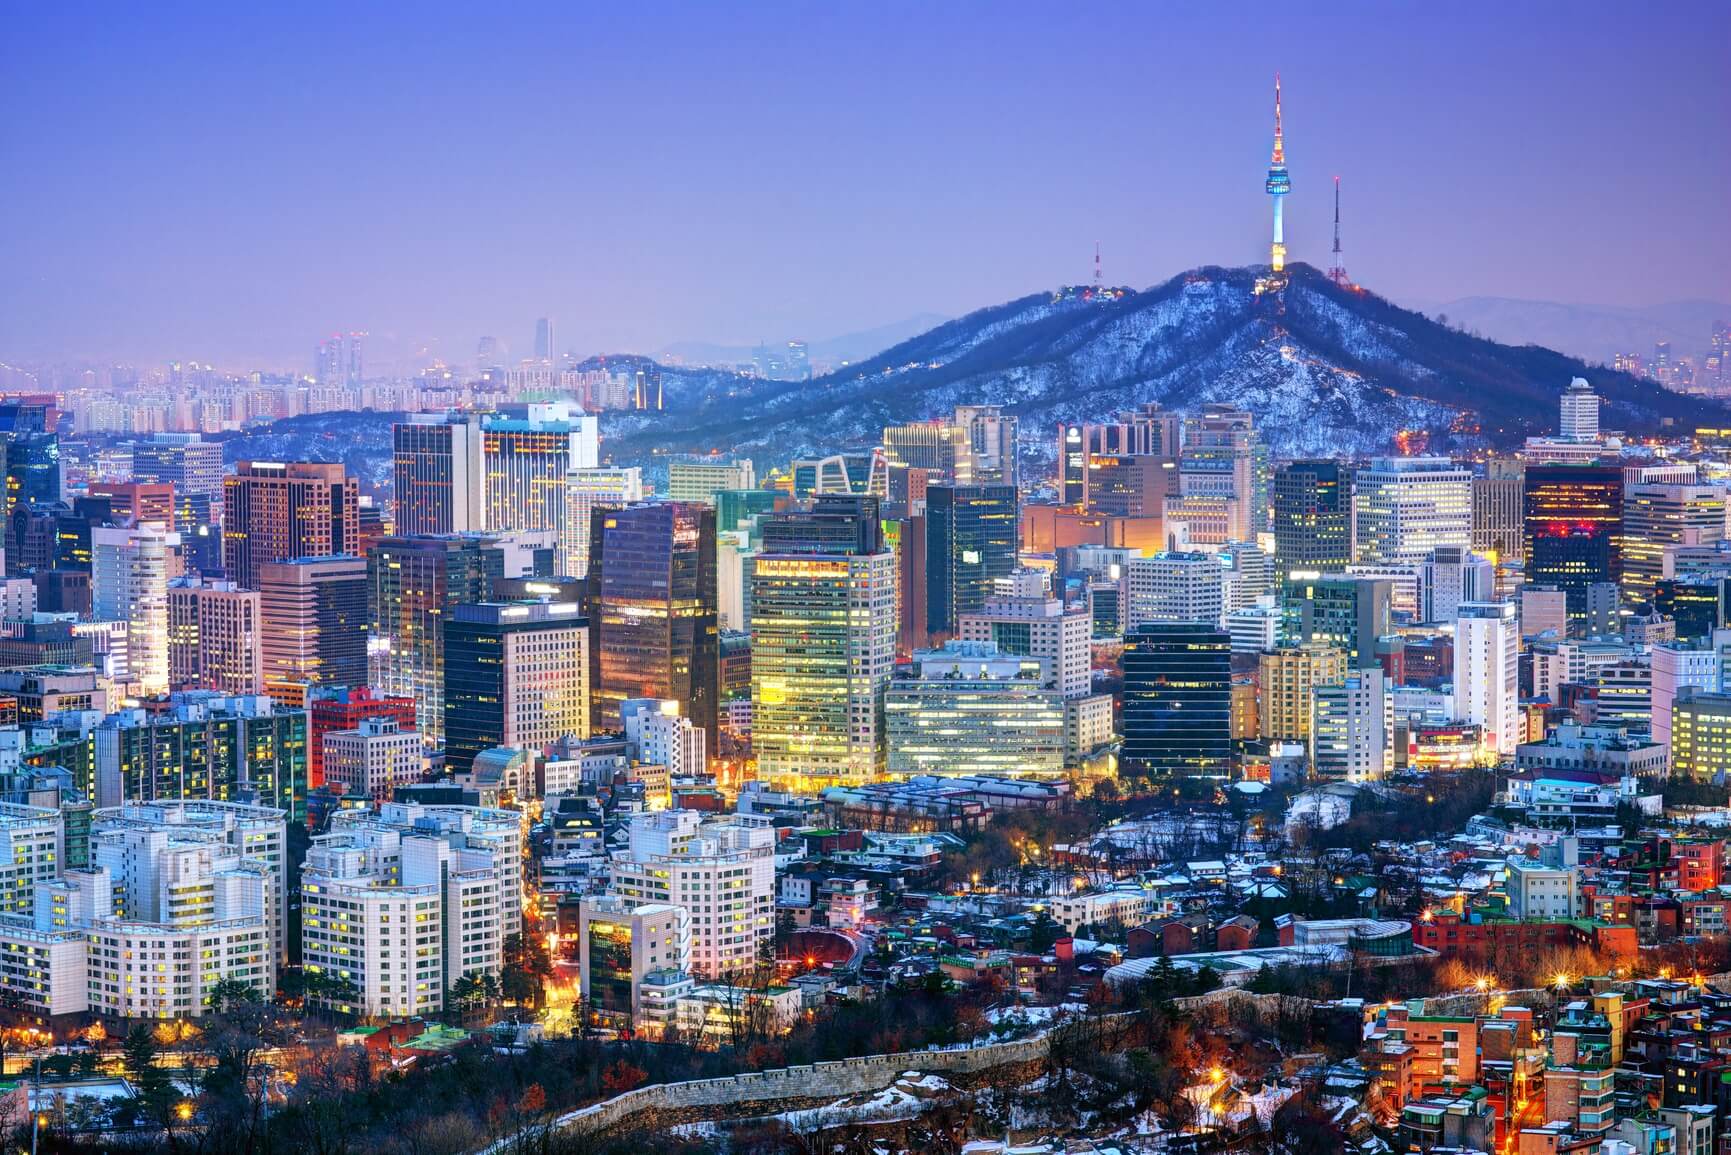 Flight deals from Turin or Milan, Italy to Seoul, South Korea | Secret Flying